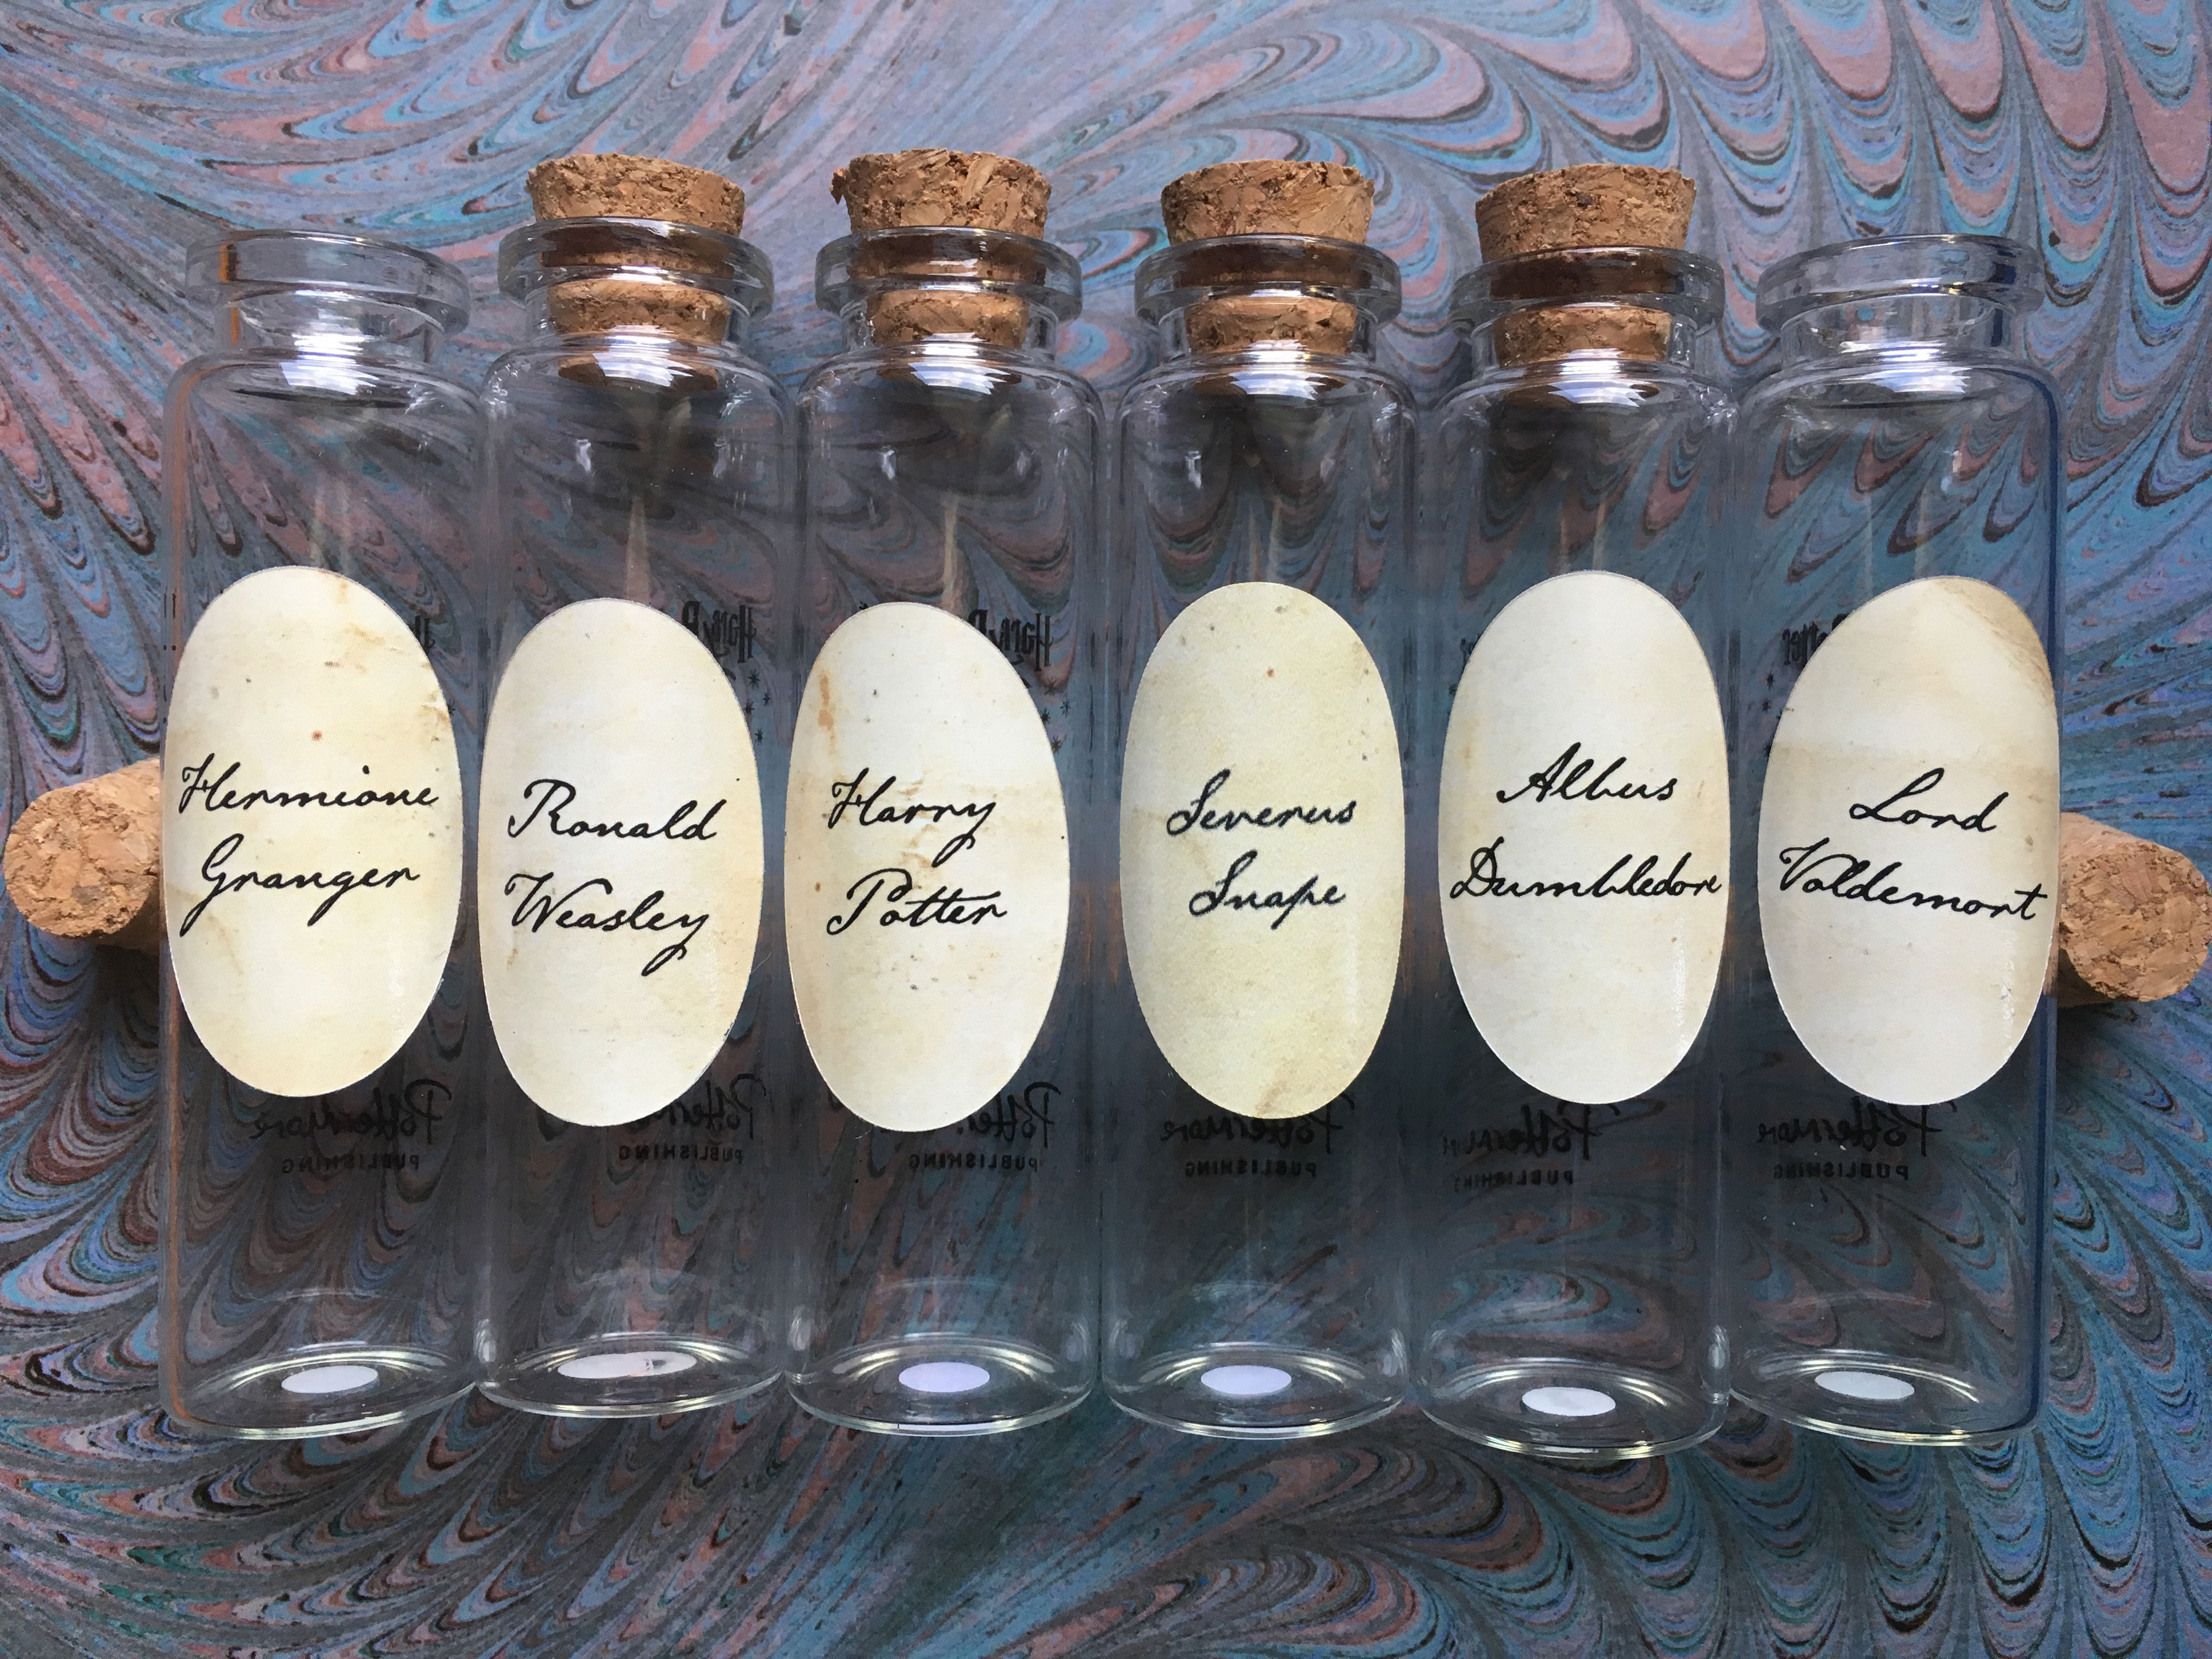 Pensieve vials with corks from Audible’s “A Harry Potter Pensieve Experience,” featuring iconic characters Albus Dumbledore, Severus Snape, Lord Voldemort, Harry Potter, Ronald Weasley, and Hermione Granger